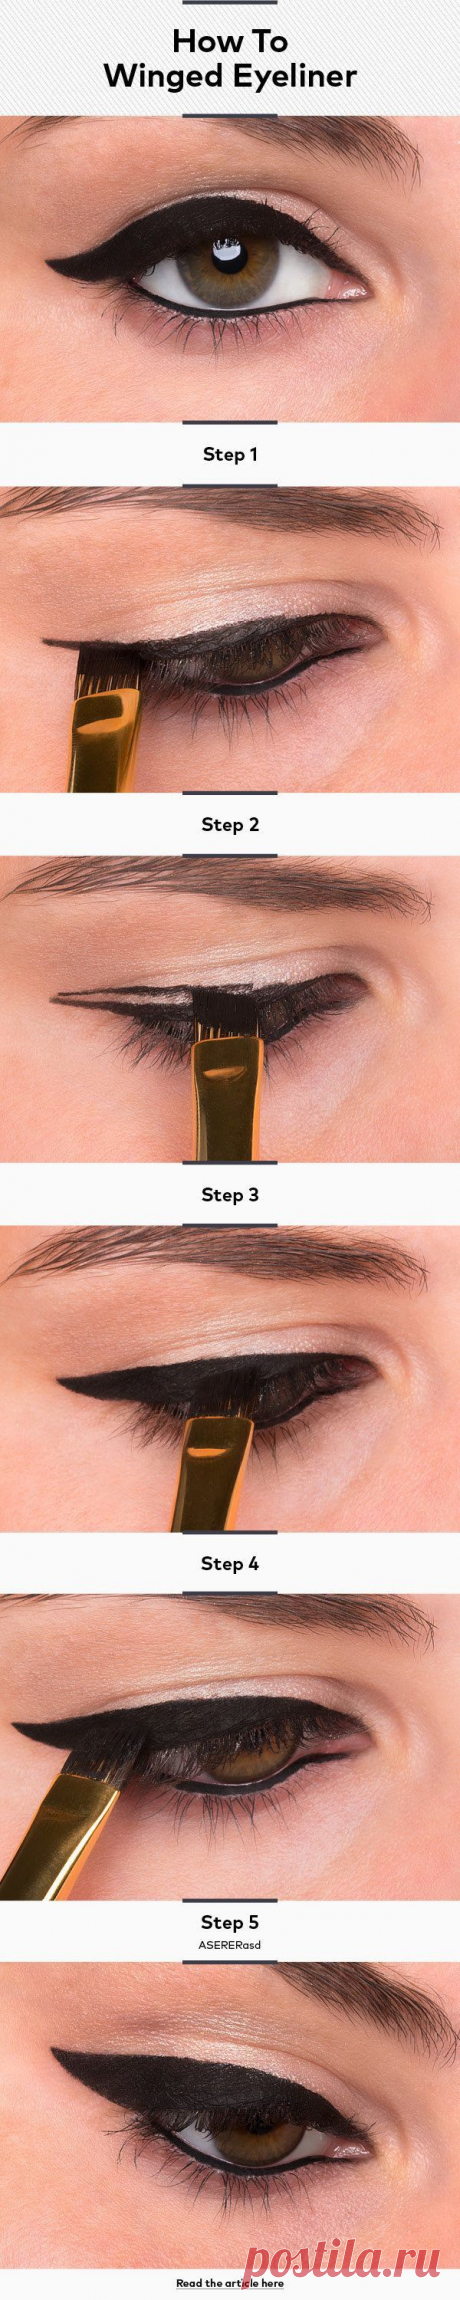 How To Do Winged Eyeliner or Cat-Eye Liner #FIDMFashionClub